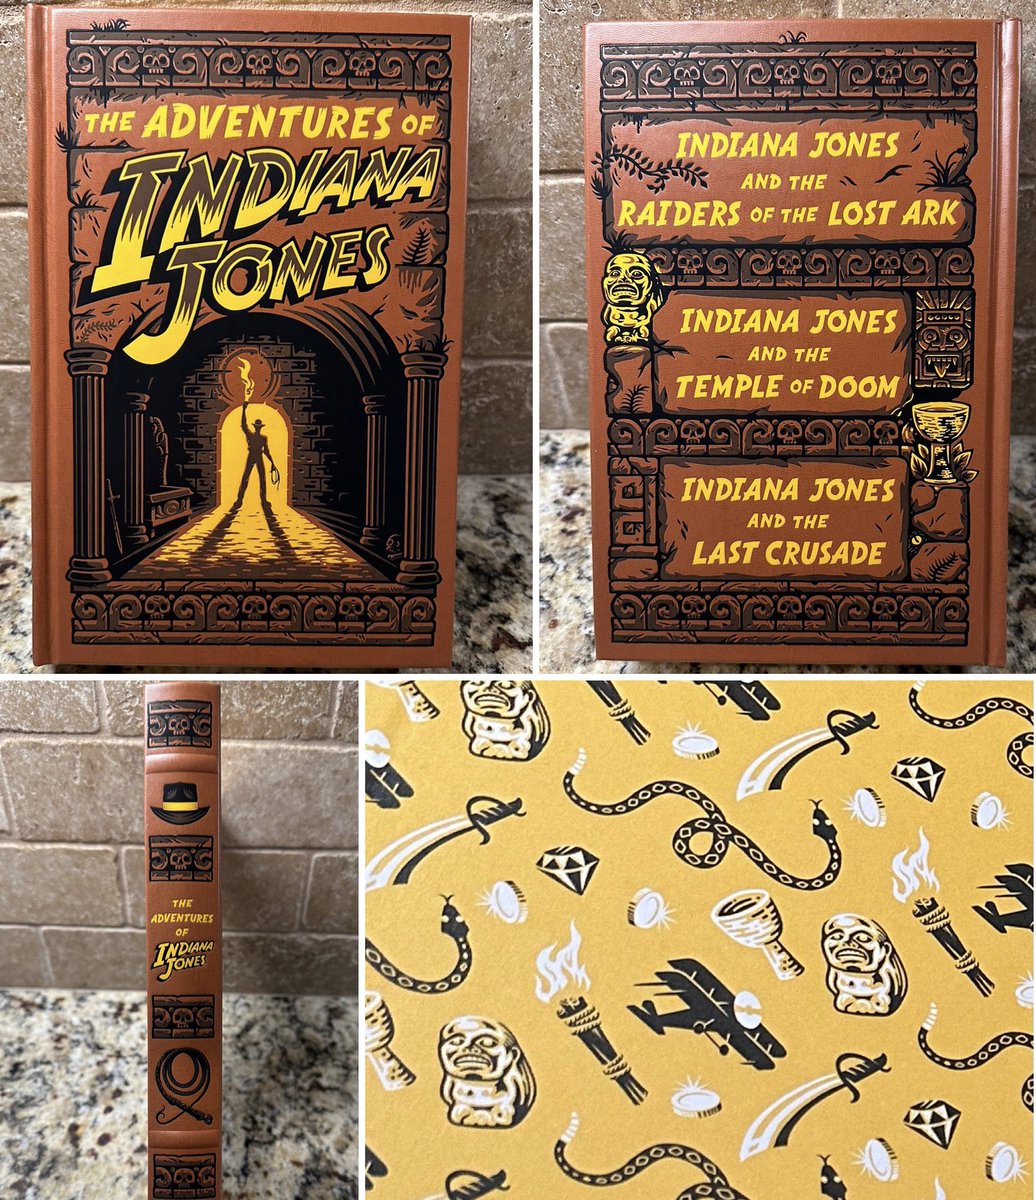 Well, the mailman dropped off another #indianajones new release today!!! The @barnesandnoble #leatherbound #trilogycollection